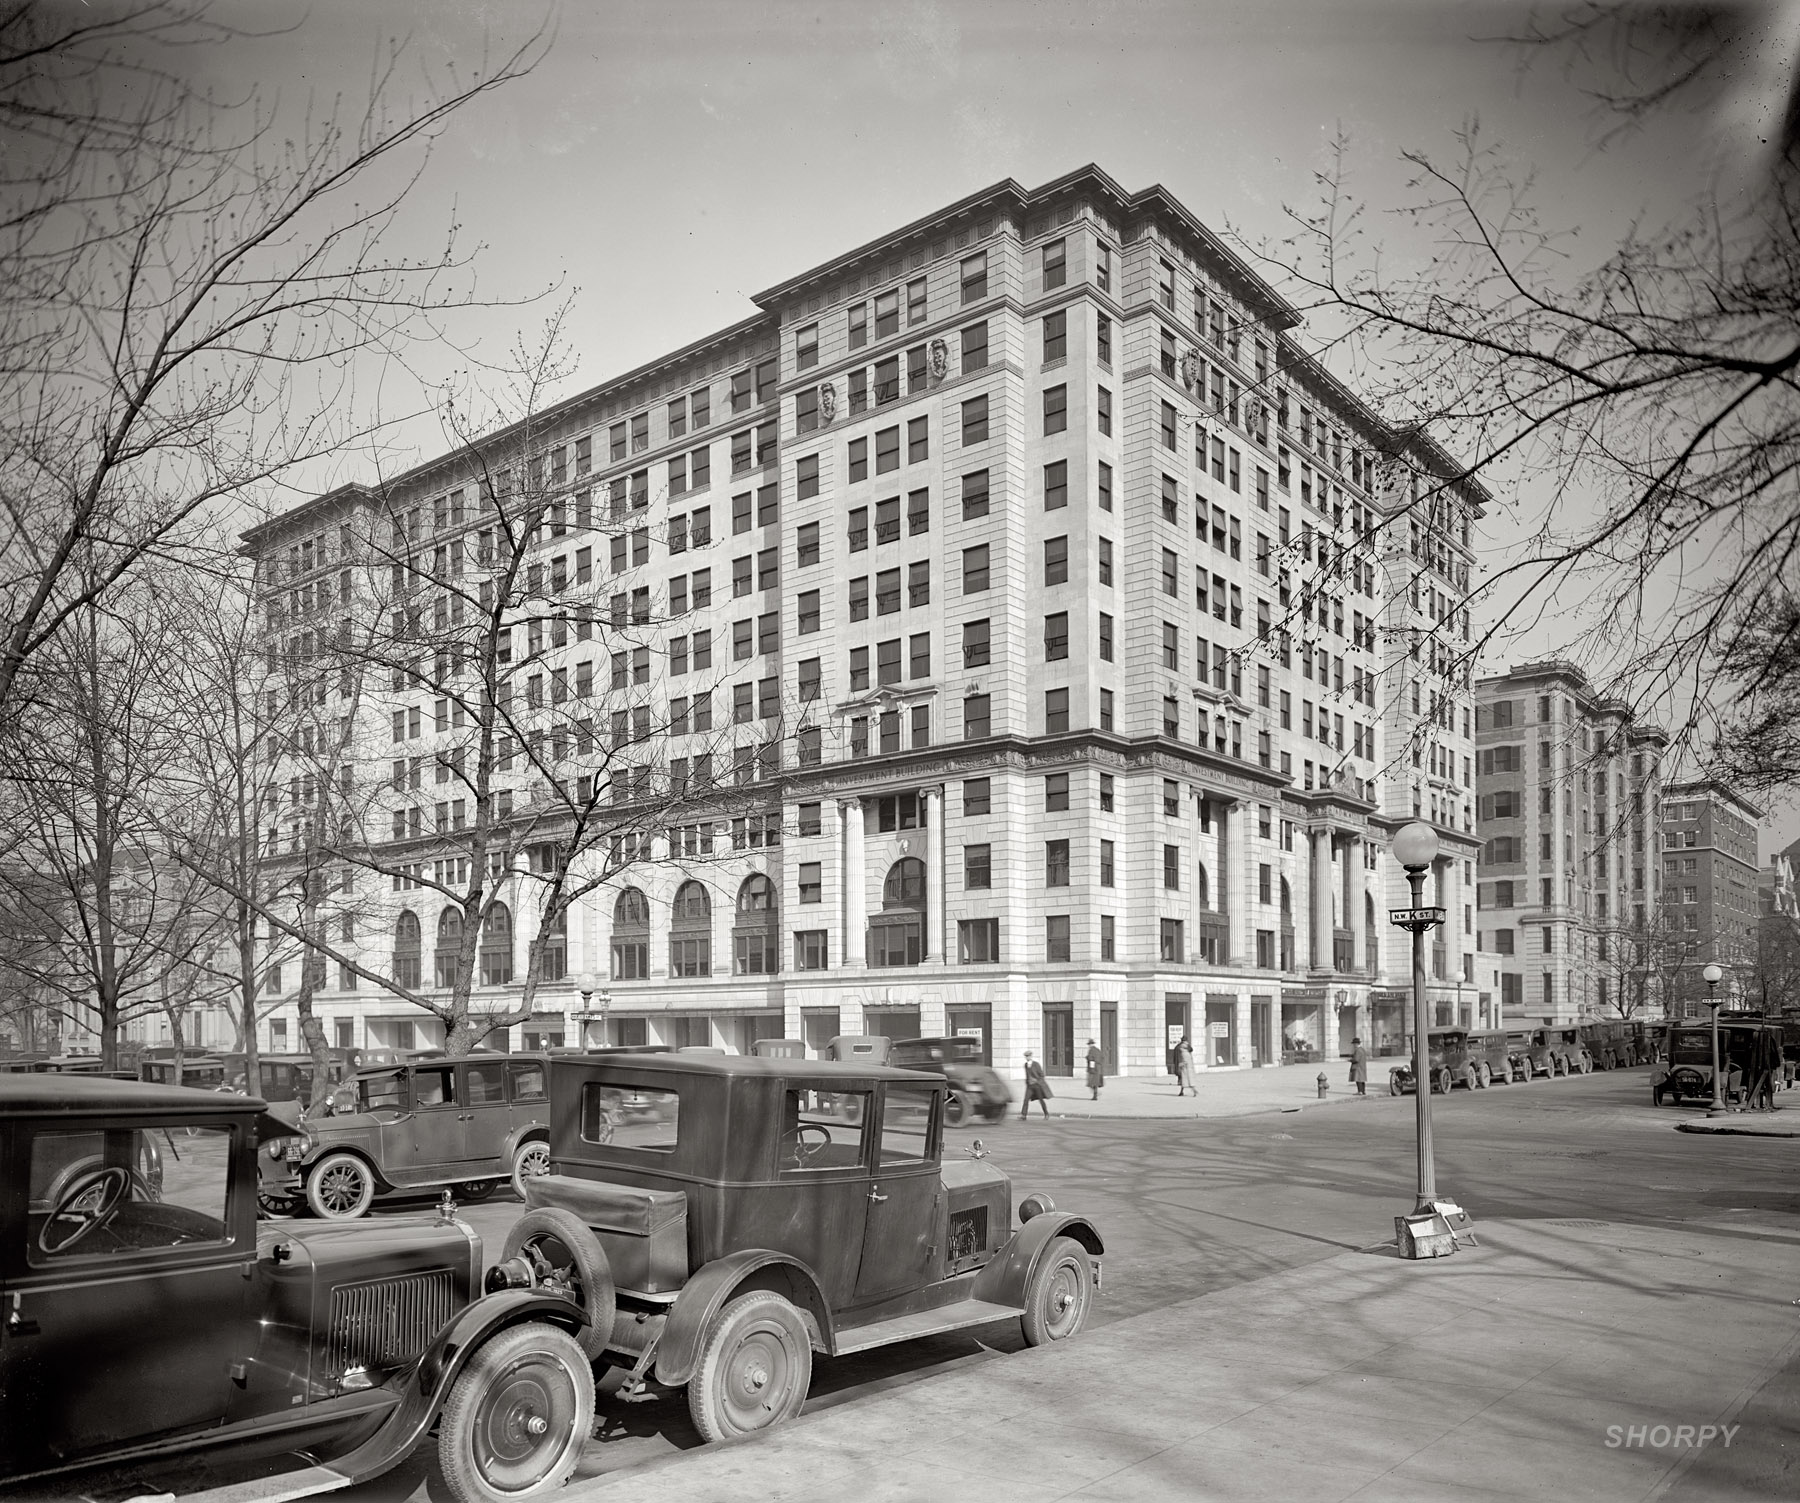 The Investment Building in Washington at 15th and K Streets in 1925, shortly after its completion. Home to the barber shop seen here yesterday, the Investment Building was touted as being the first big office building in the East with an underground parking garage. Ten years ago it was torn down and replaced with a new structure designed by Cesar Pelli, who used the original limestone for the street-facing facades, which were propped up during demolition with a framework of steel girders. Except for the modern superstructure peeking over the top, the new Investment Building looks pretty much like the old one. National Photo Company Collection glass negative. View full size.